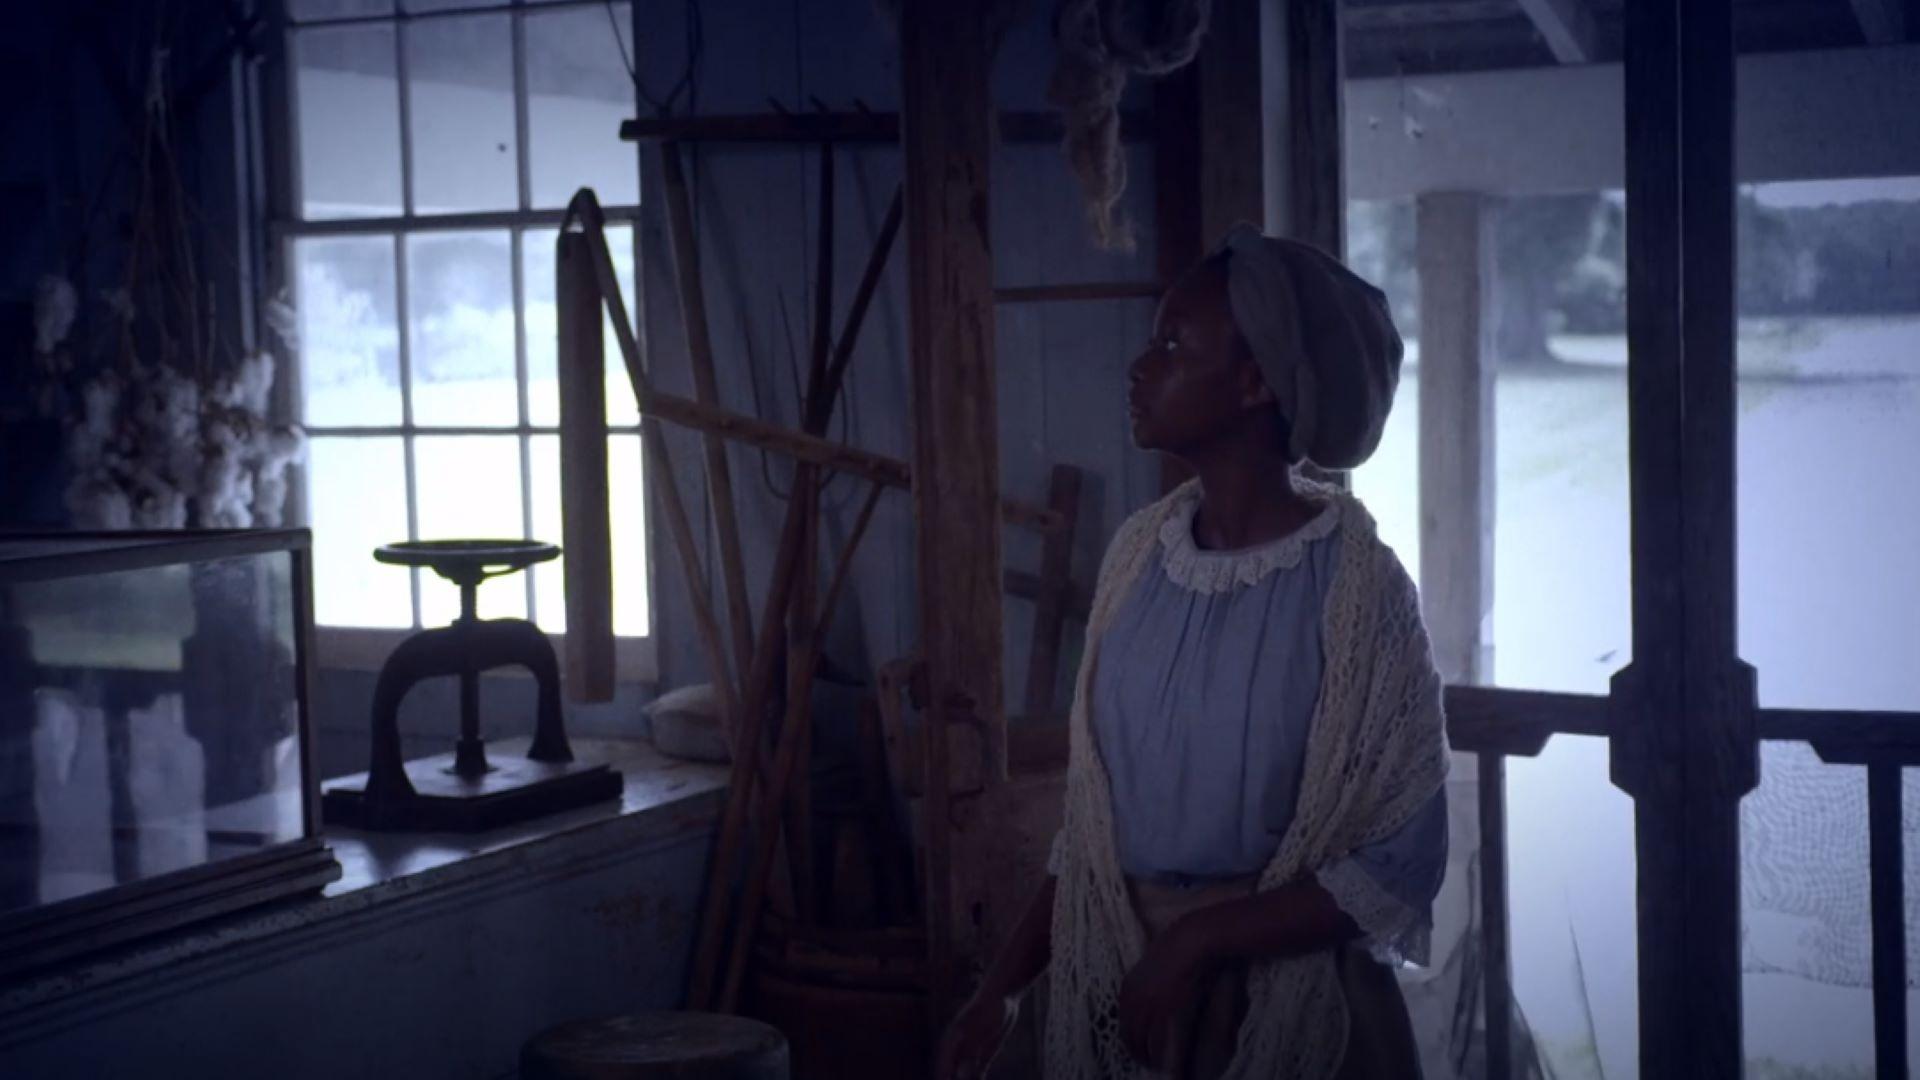 Visions, Harriet Tubman: Visions of Freedom